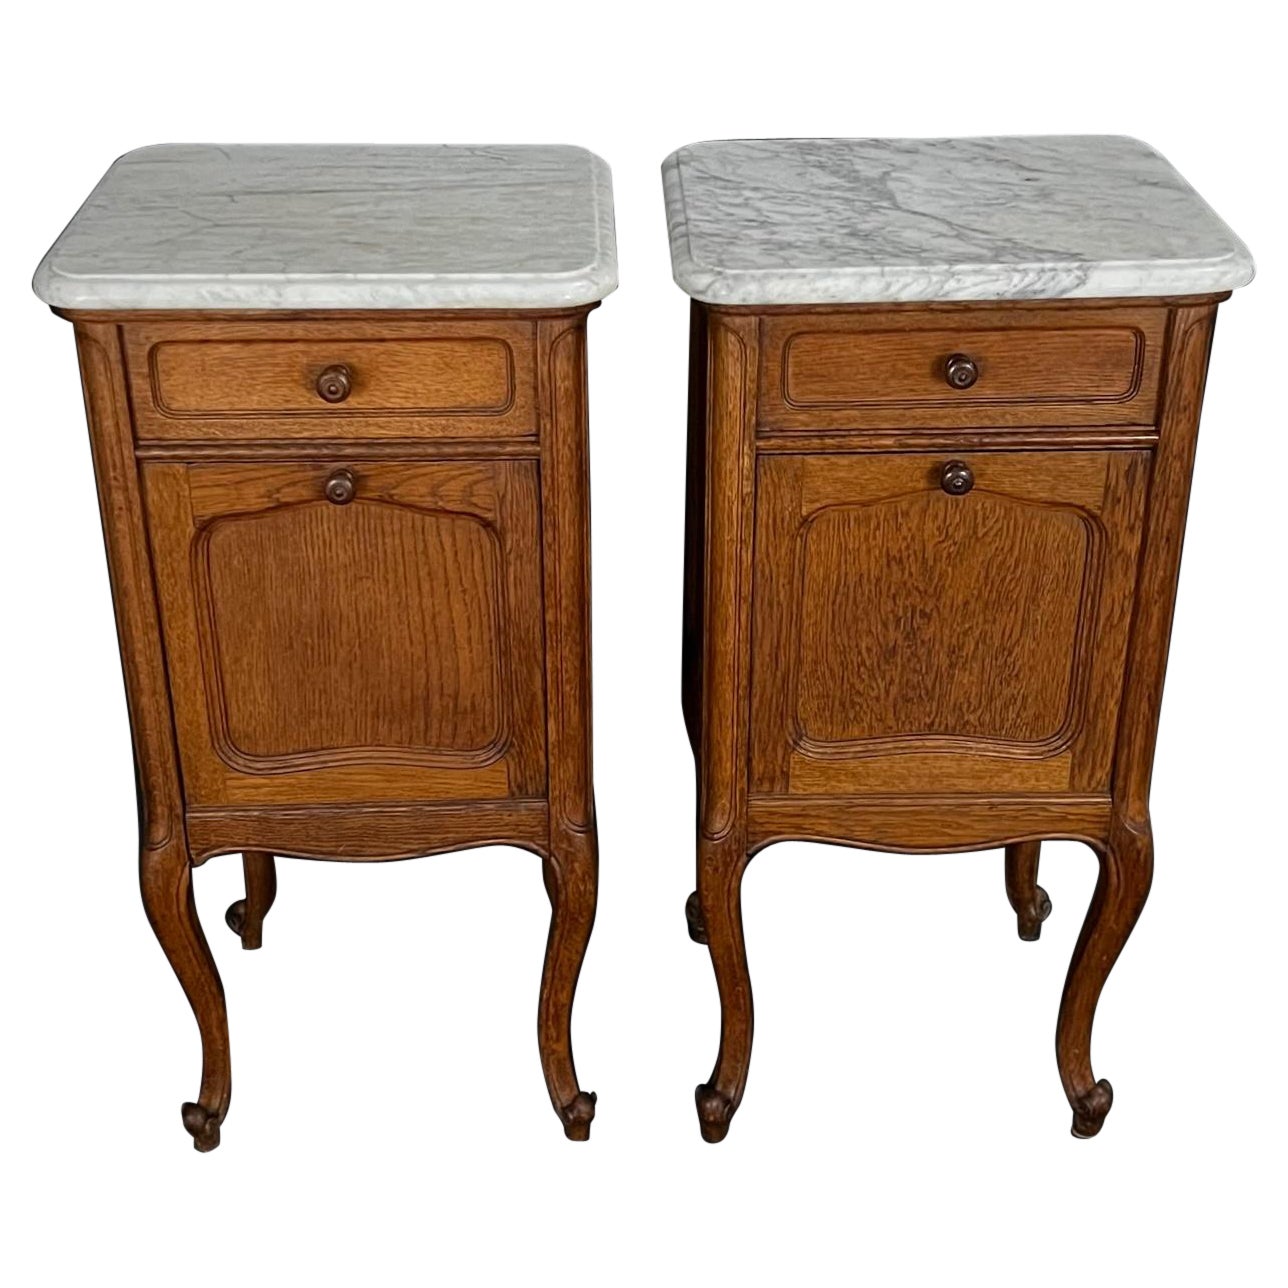  Lovely Pair of French Marble Top Antique Night Stands